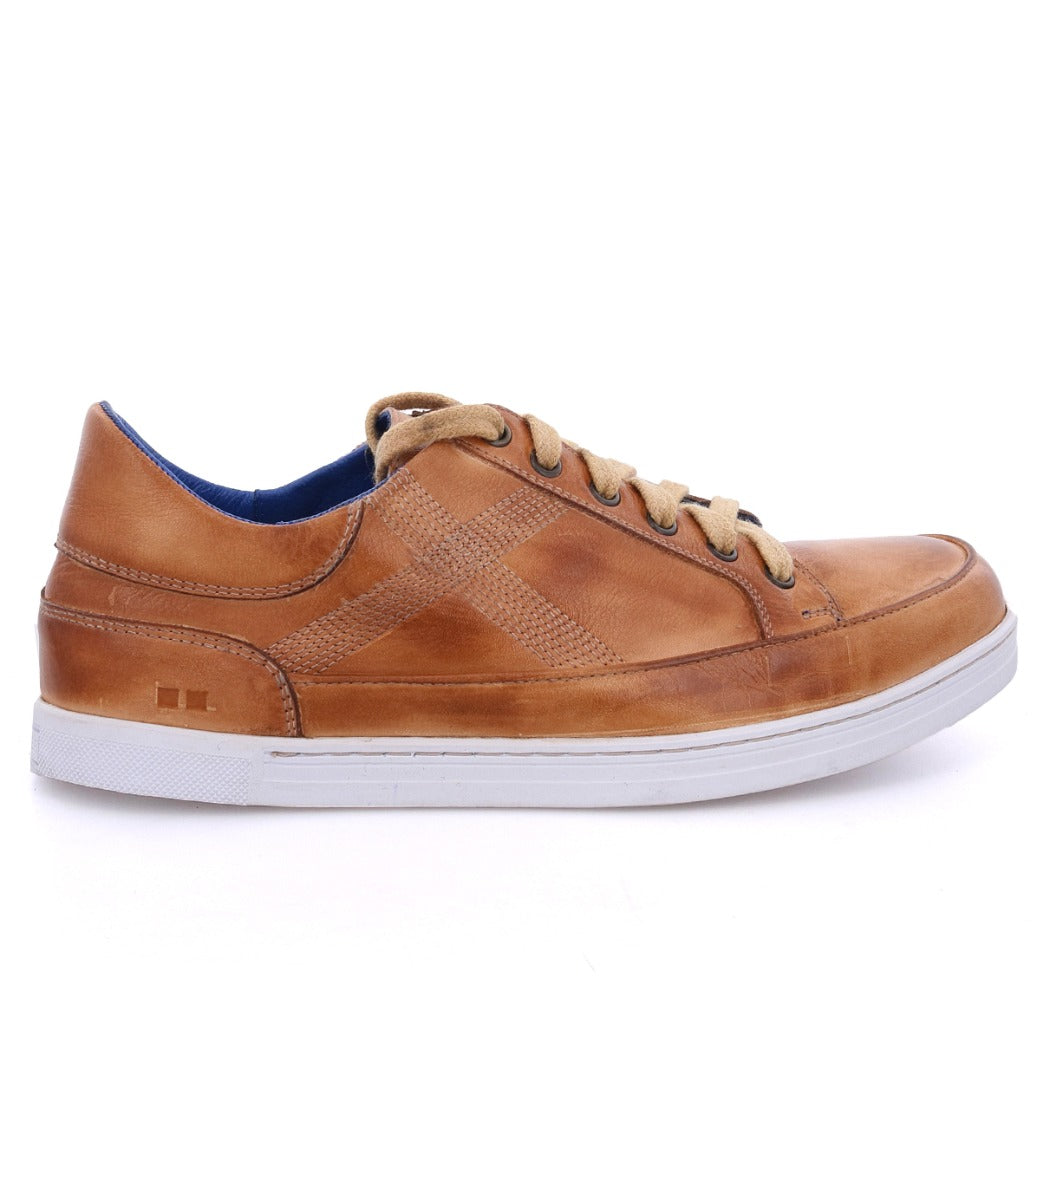 A Bed Stu men's tan leather sneaker with blue laces.